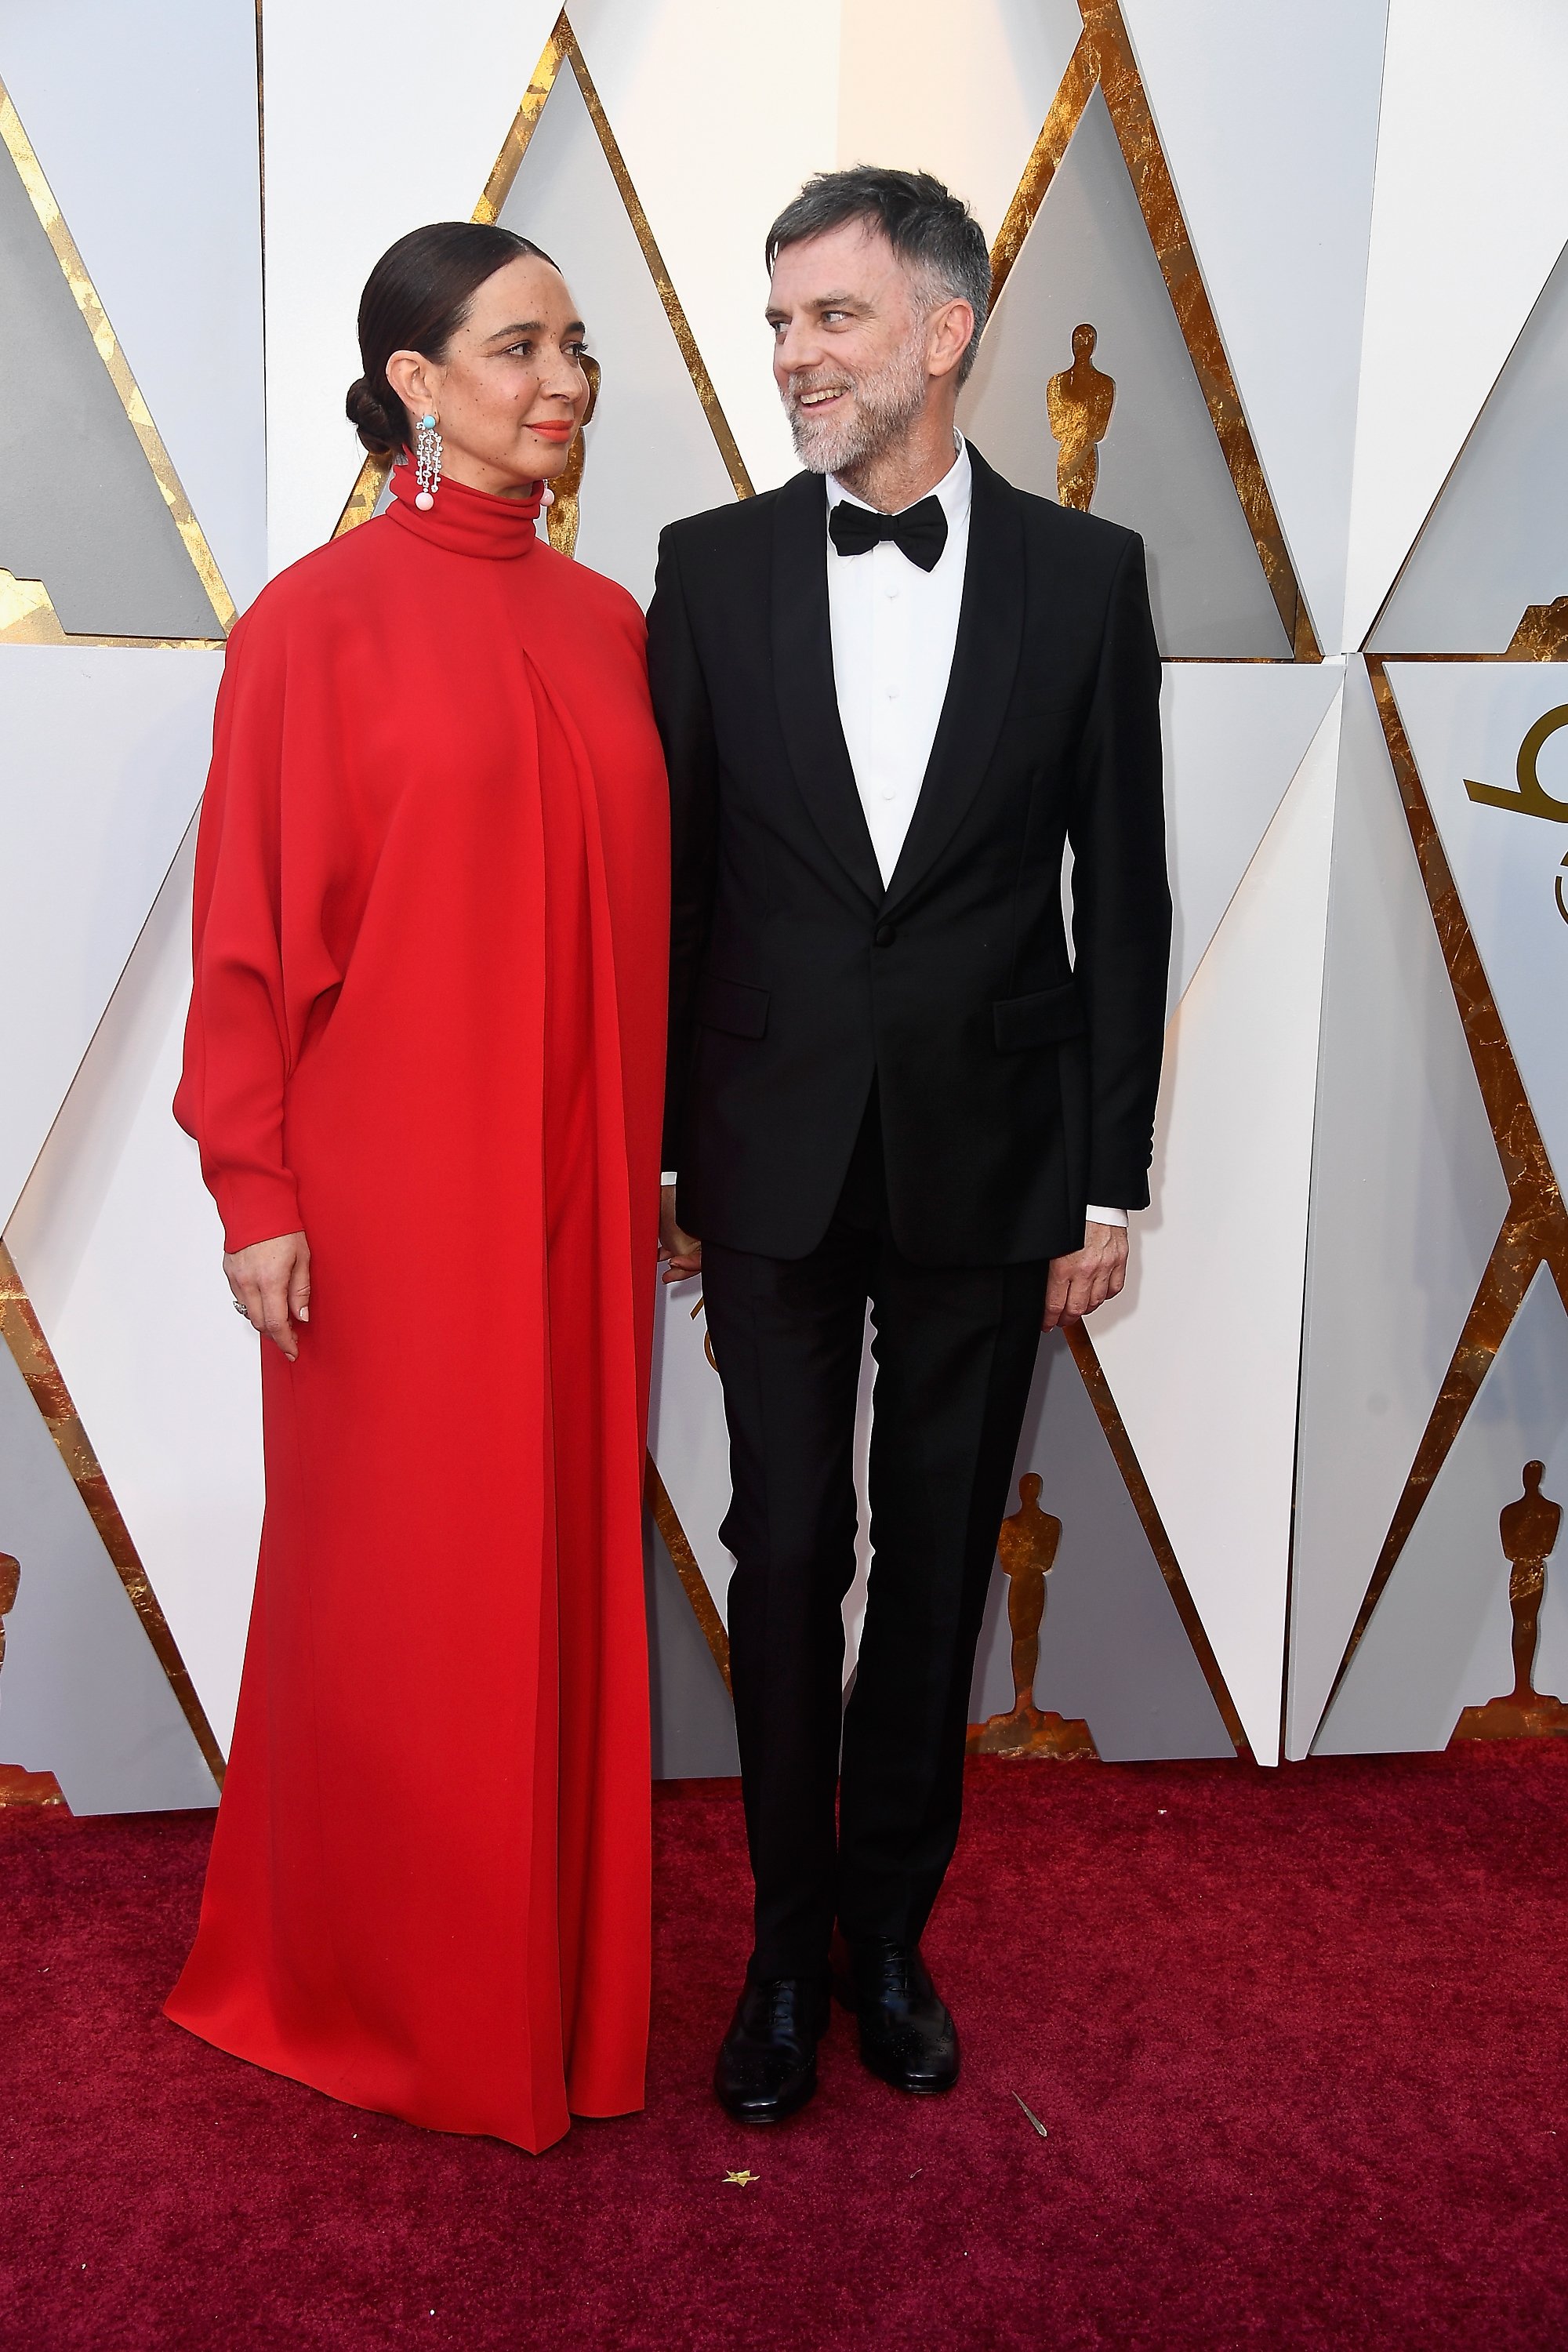 Maya Rudolph and Paul Thomas Anderson at the 90th Annual Academy Awards on March 4, 2018 in Hollywood, California | Photo: Getty Images